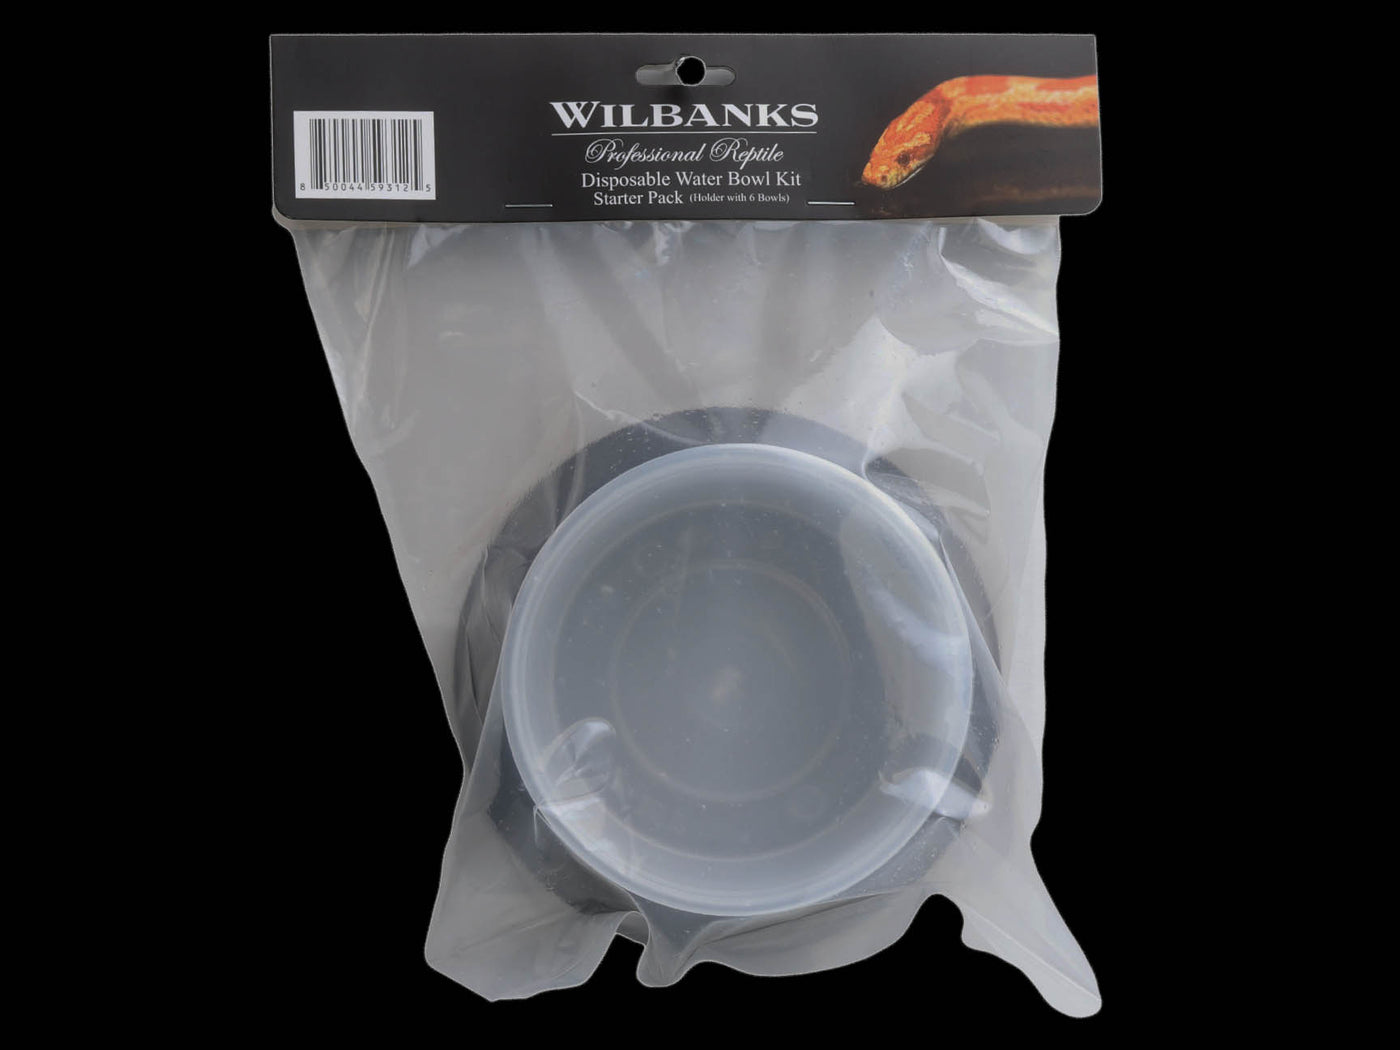 Wilbanks - Disposable Water Bowl Starter Pack (Holder with (6) 10oz Bowls)